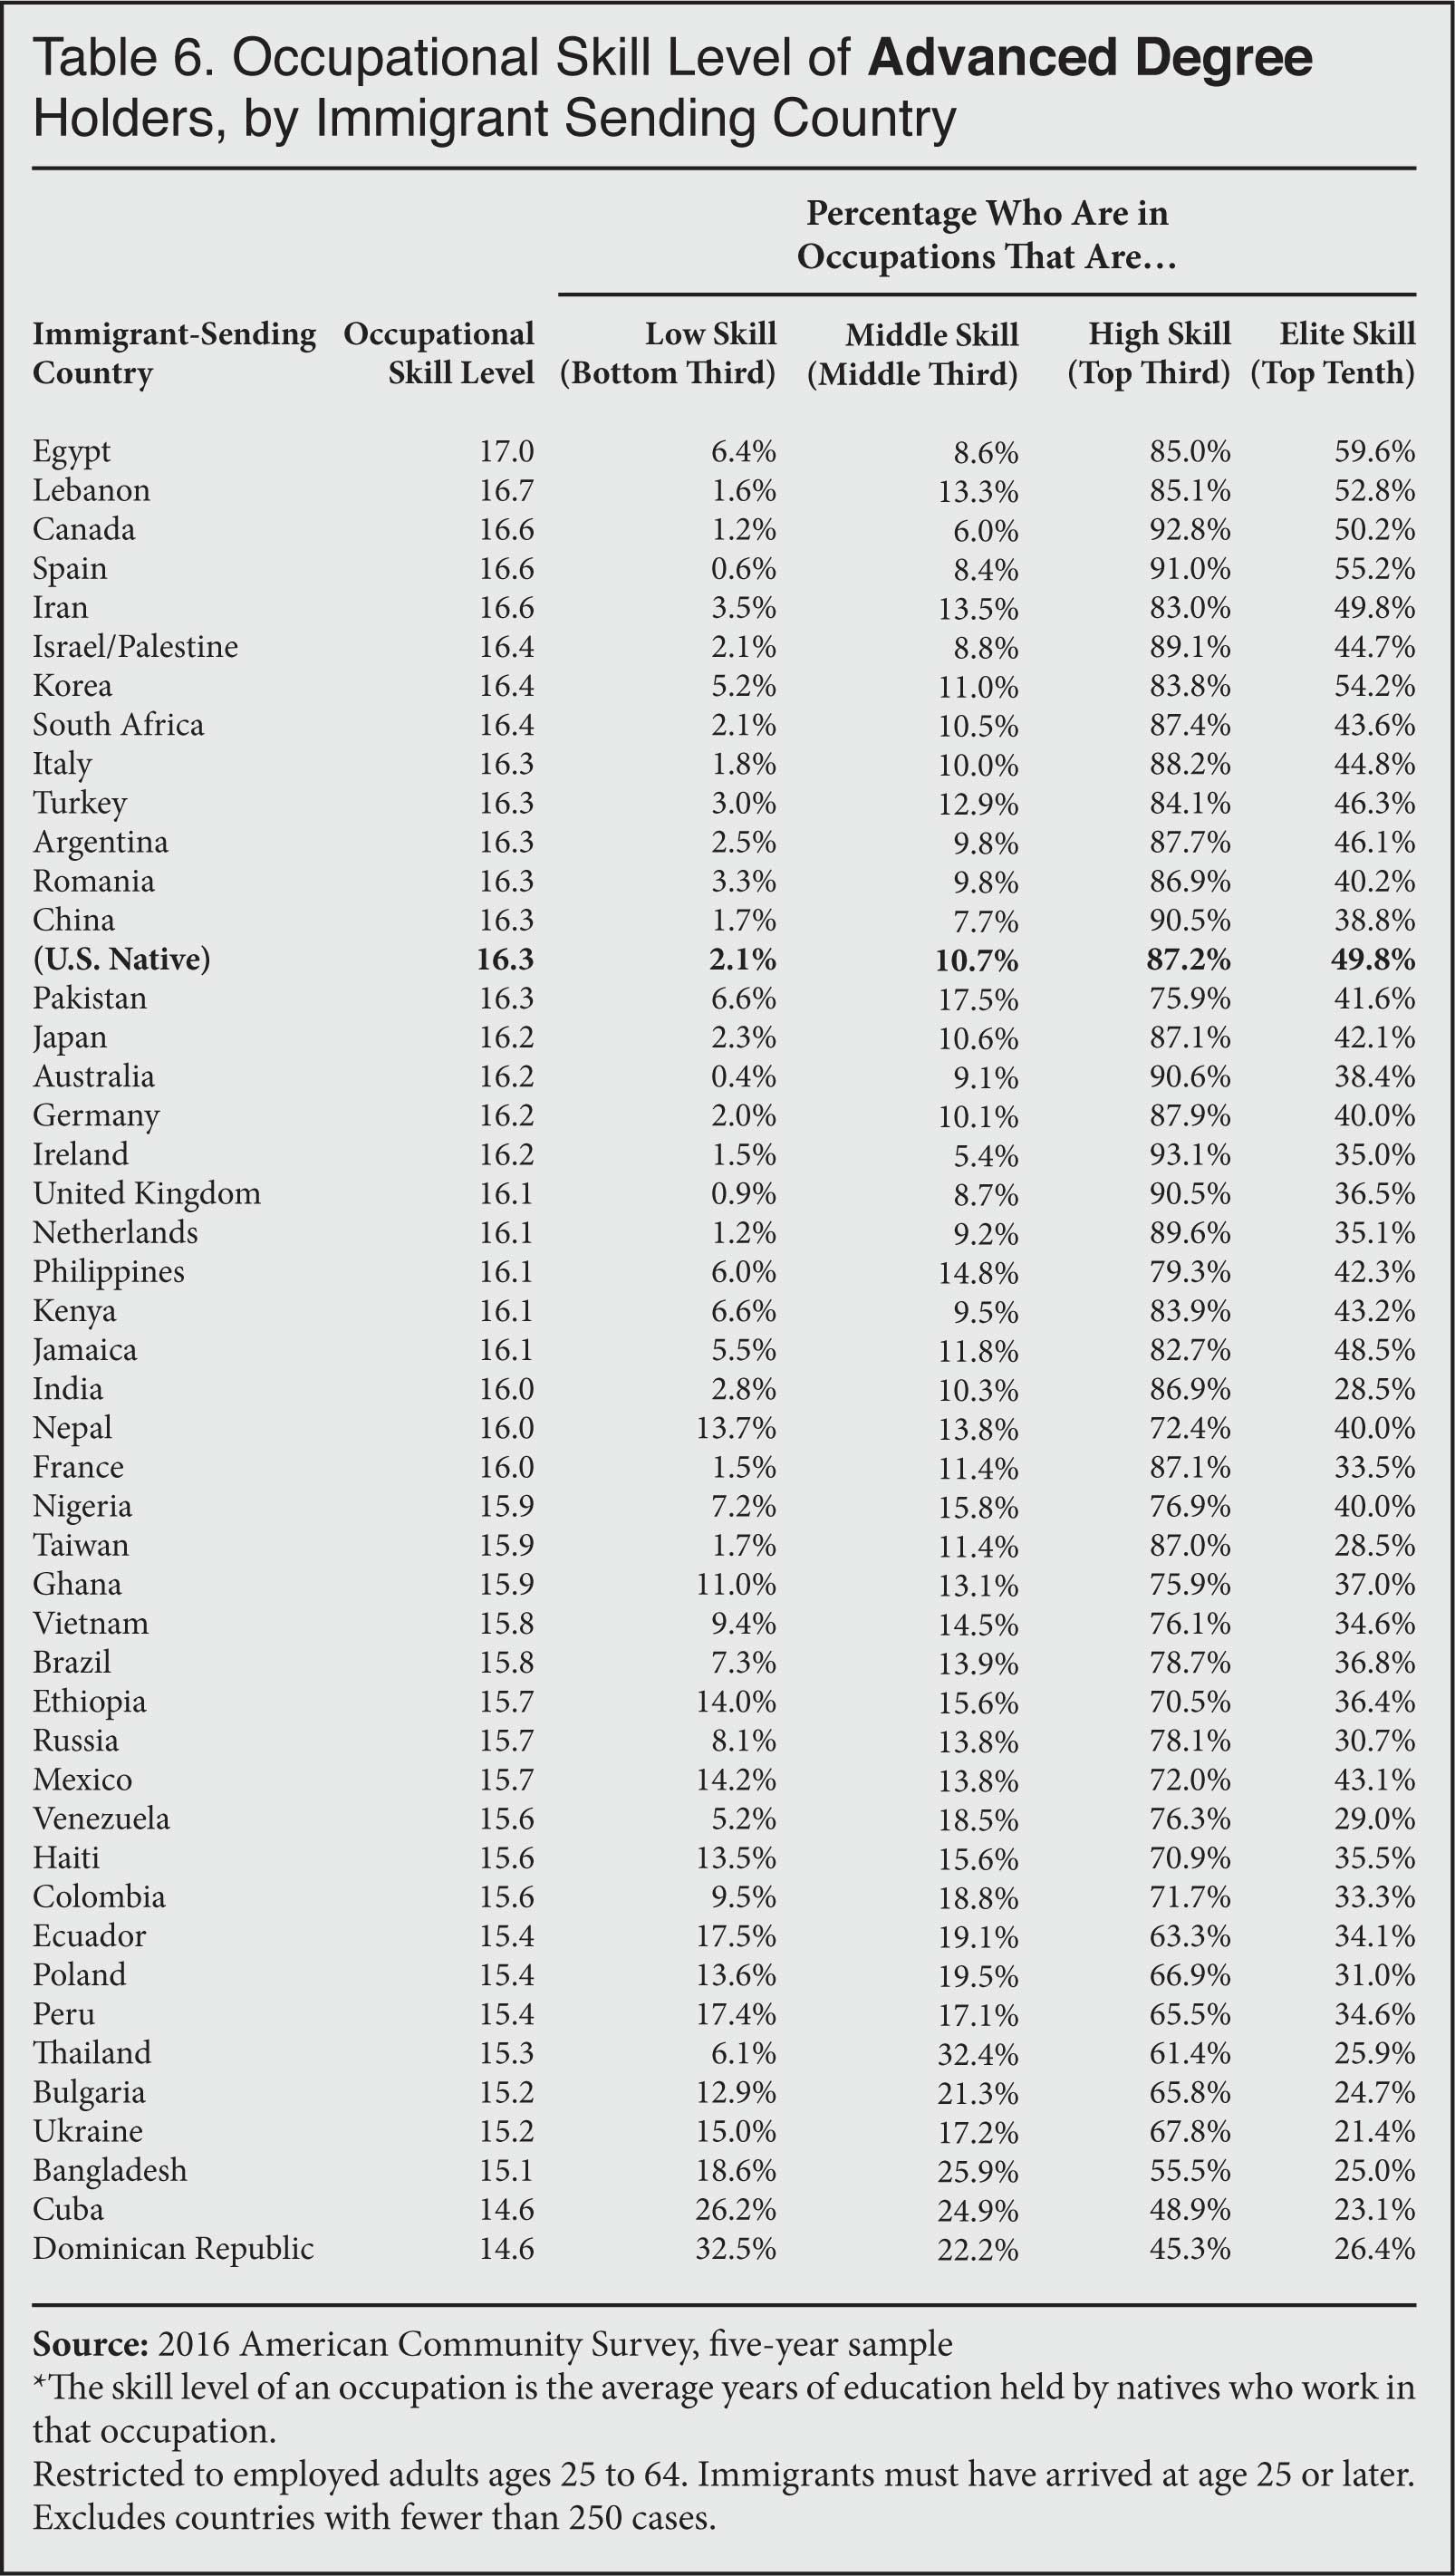 Table: Occupational Skill Level of Advanced Degree Holders, by Immigrant Sending Country